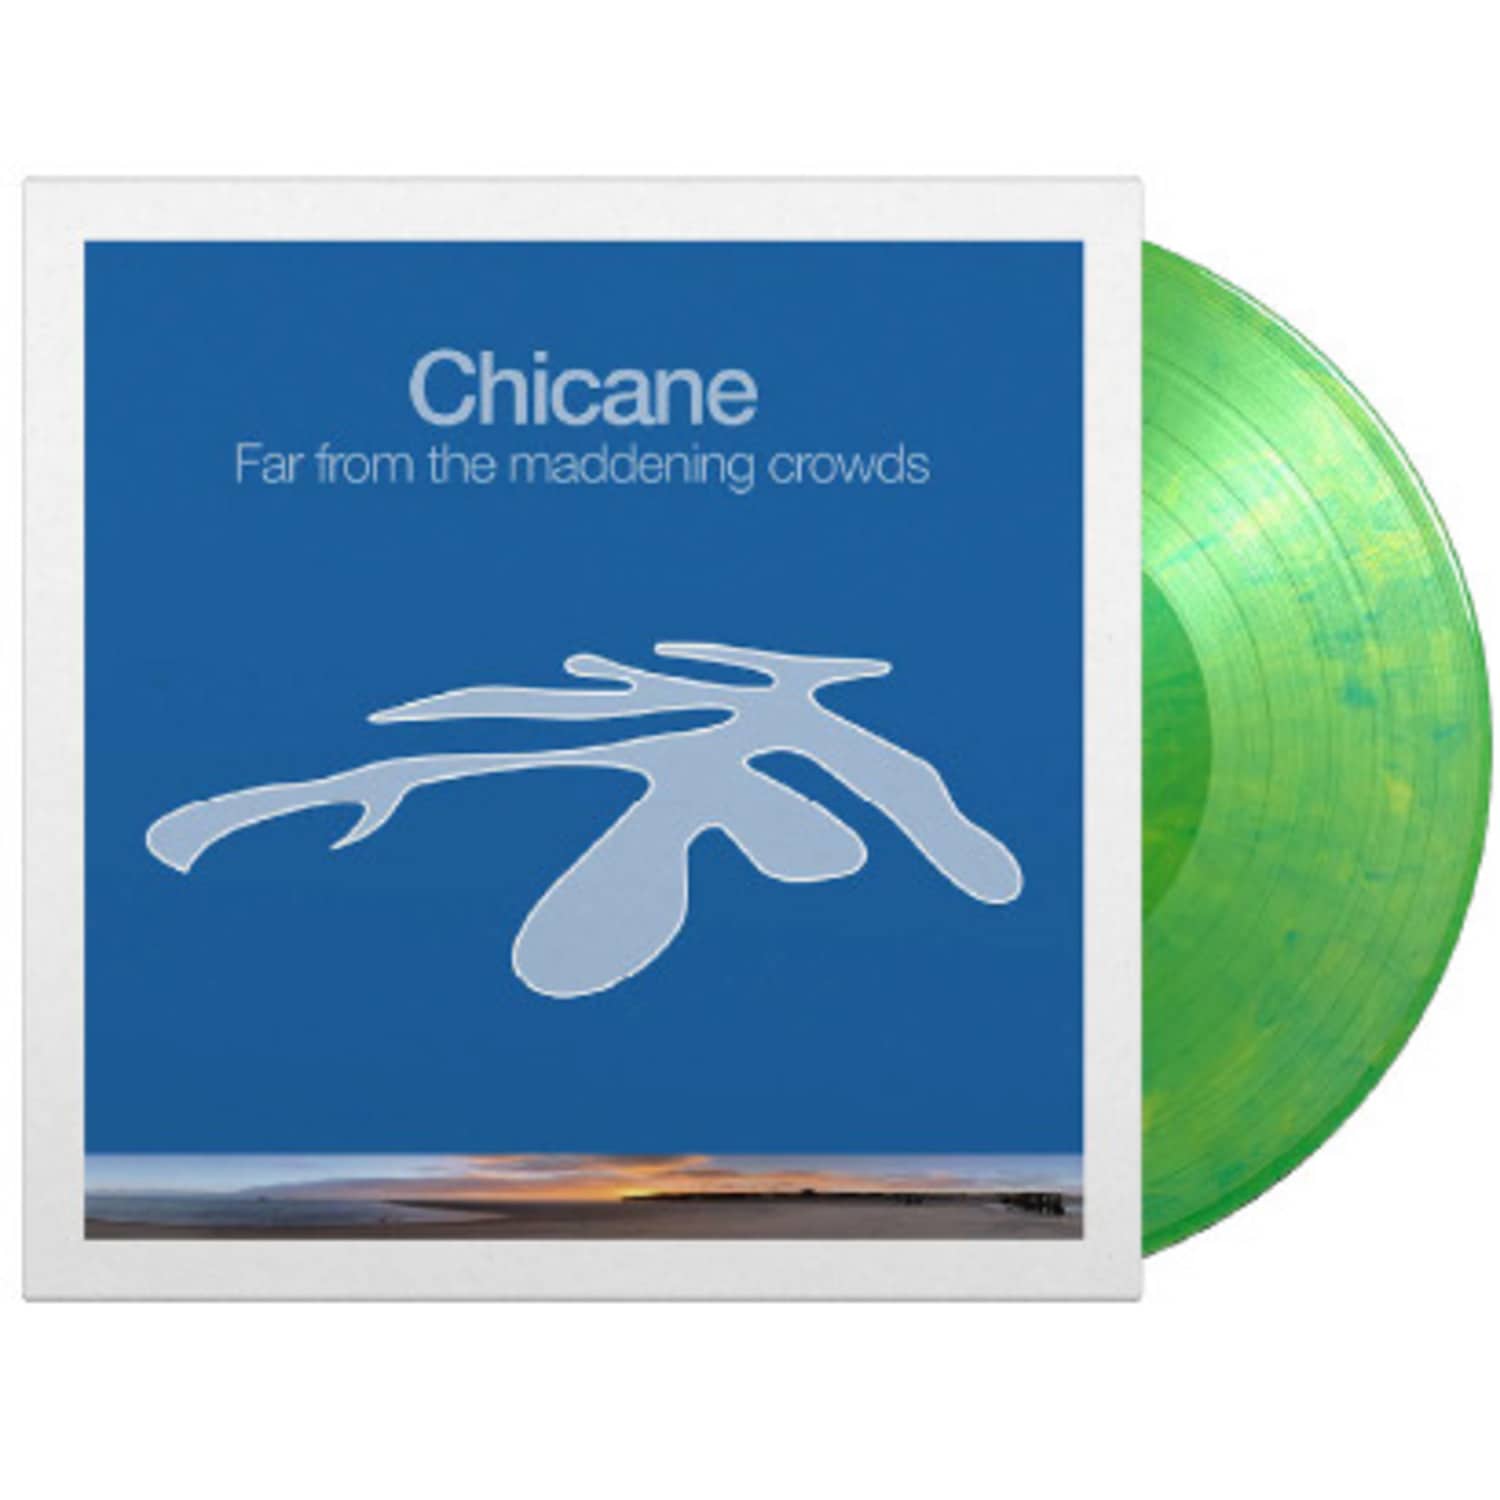 Chicane - FAR FROM THE MADDENING CROWDS 